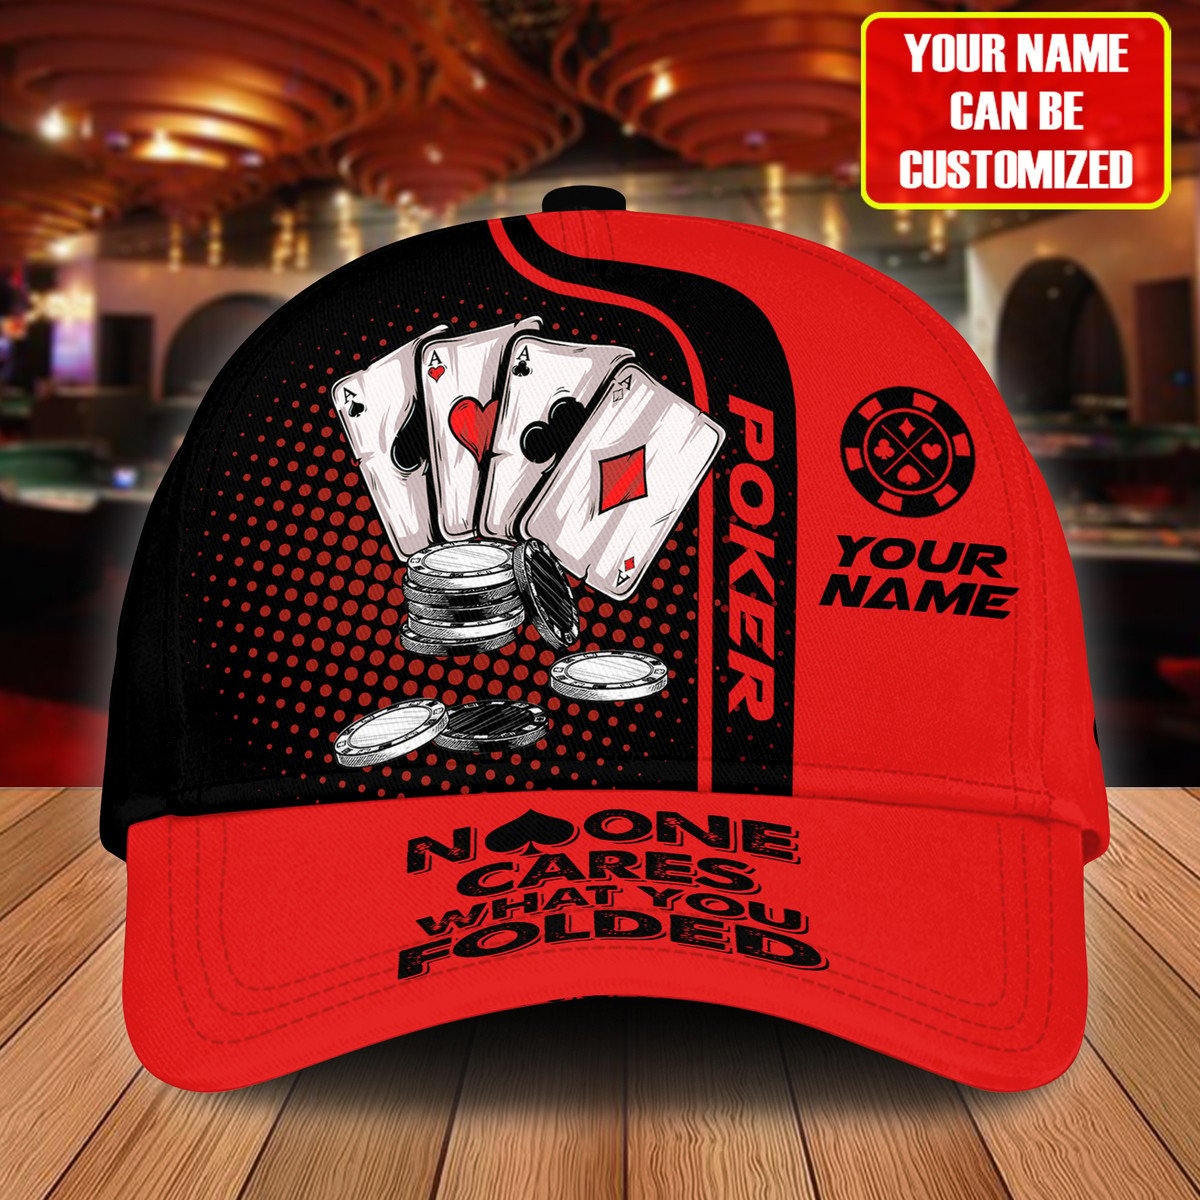 Personalized Name Poker Work and Folded Classic Cap/ Red Poker Cap for Men Women